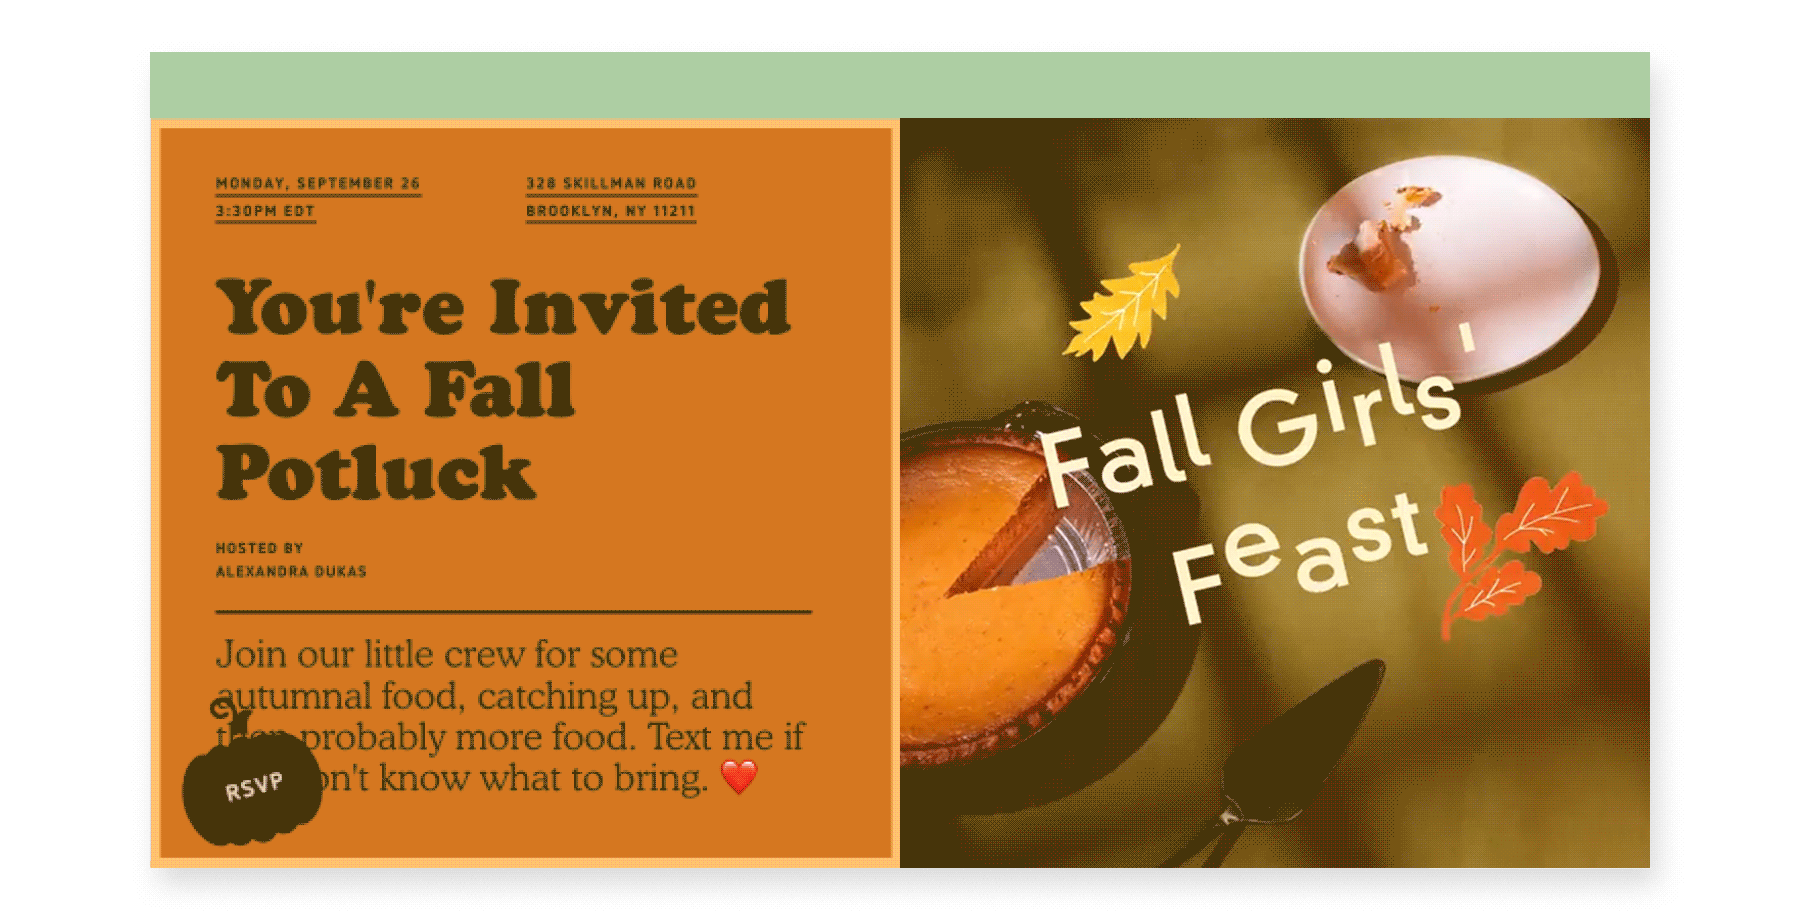 An animated invite featuring a slice of pie slowly disappearing from a white plate. Overlaid text reads “Fall Girls’ Feast.”